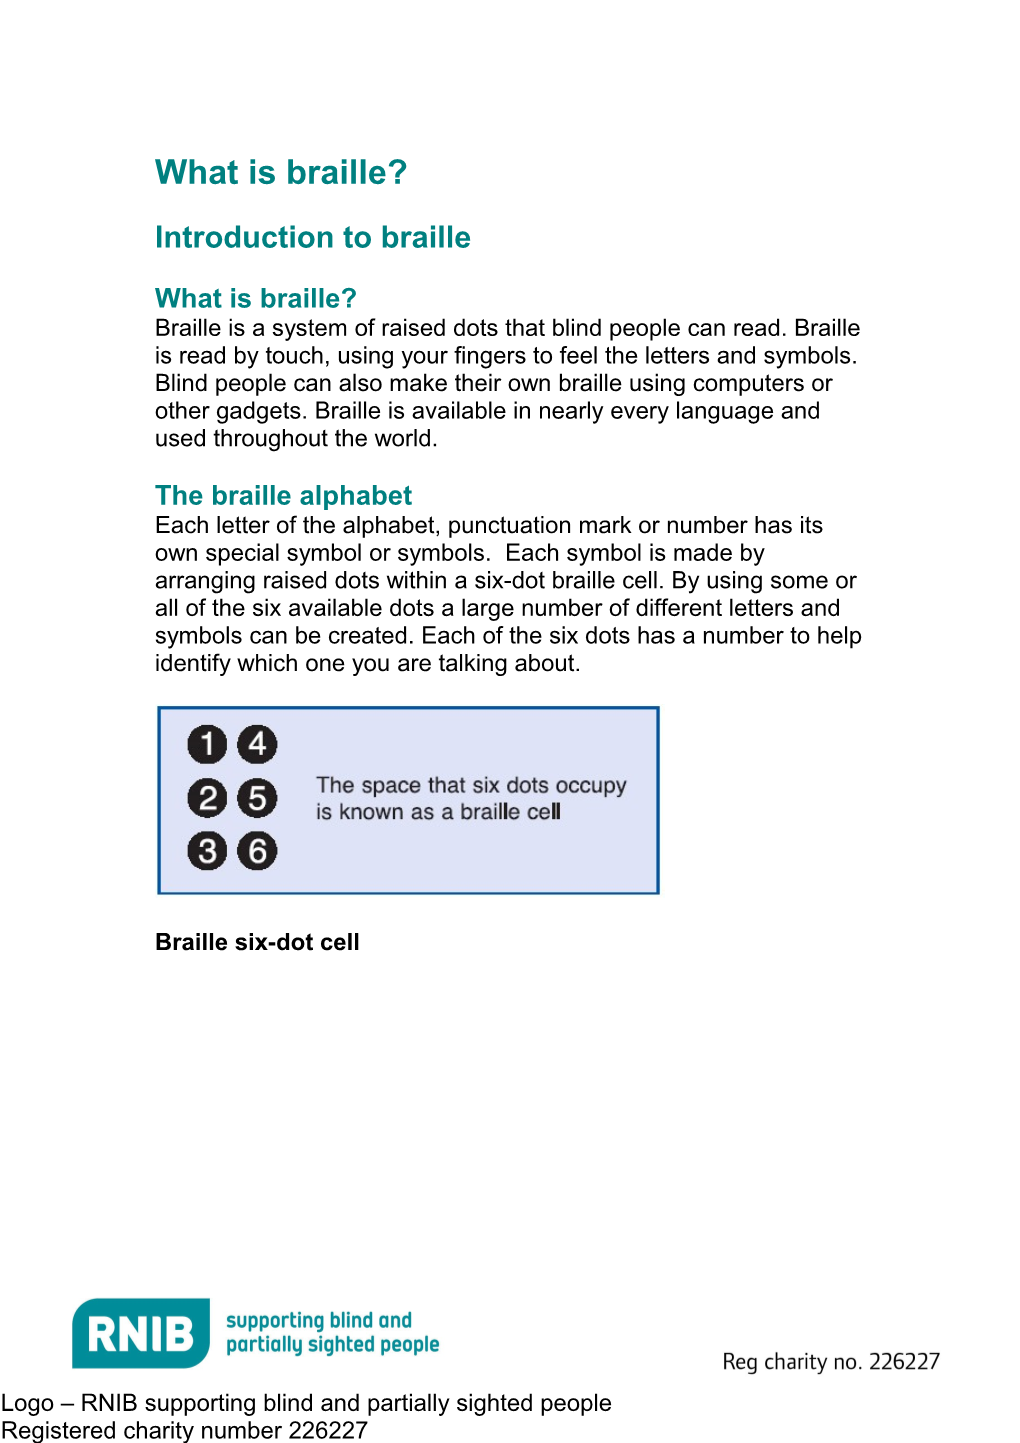 School Learning Pack: What Is Braille? Teacher's Guide